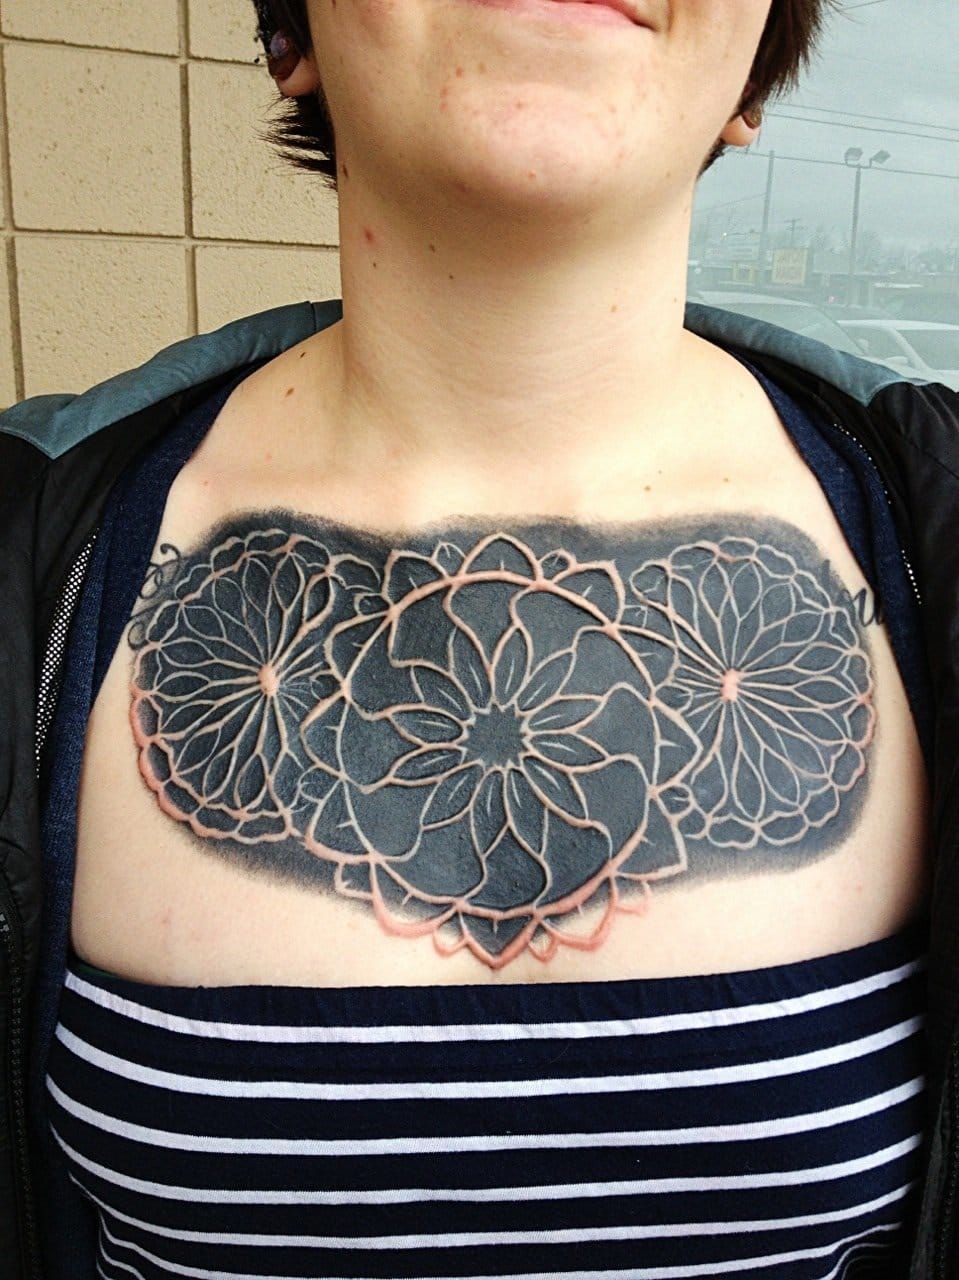 What to do with your heavy black tattoo? Transform it! (If you can handle it. :-p )